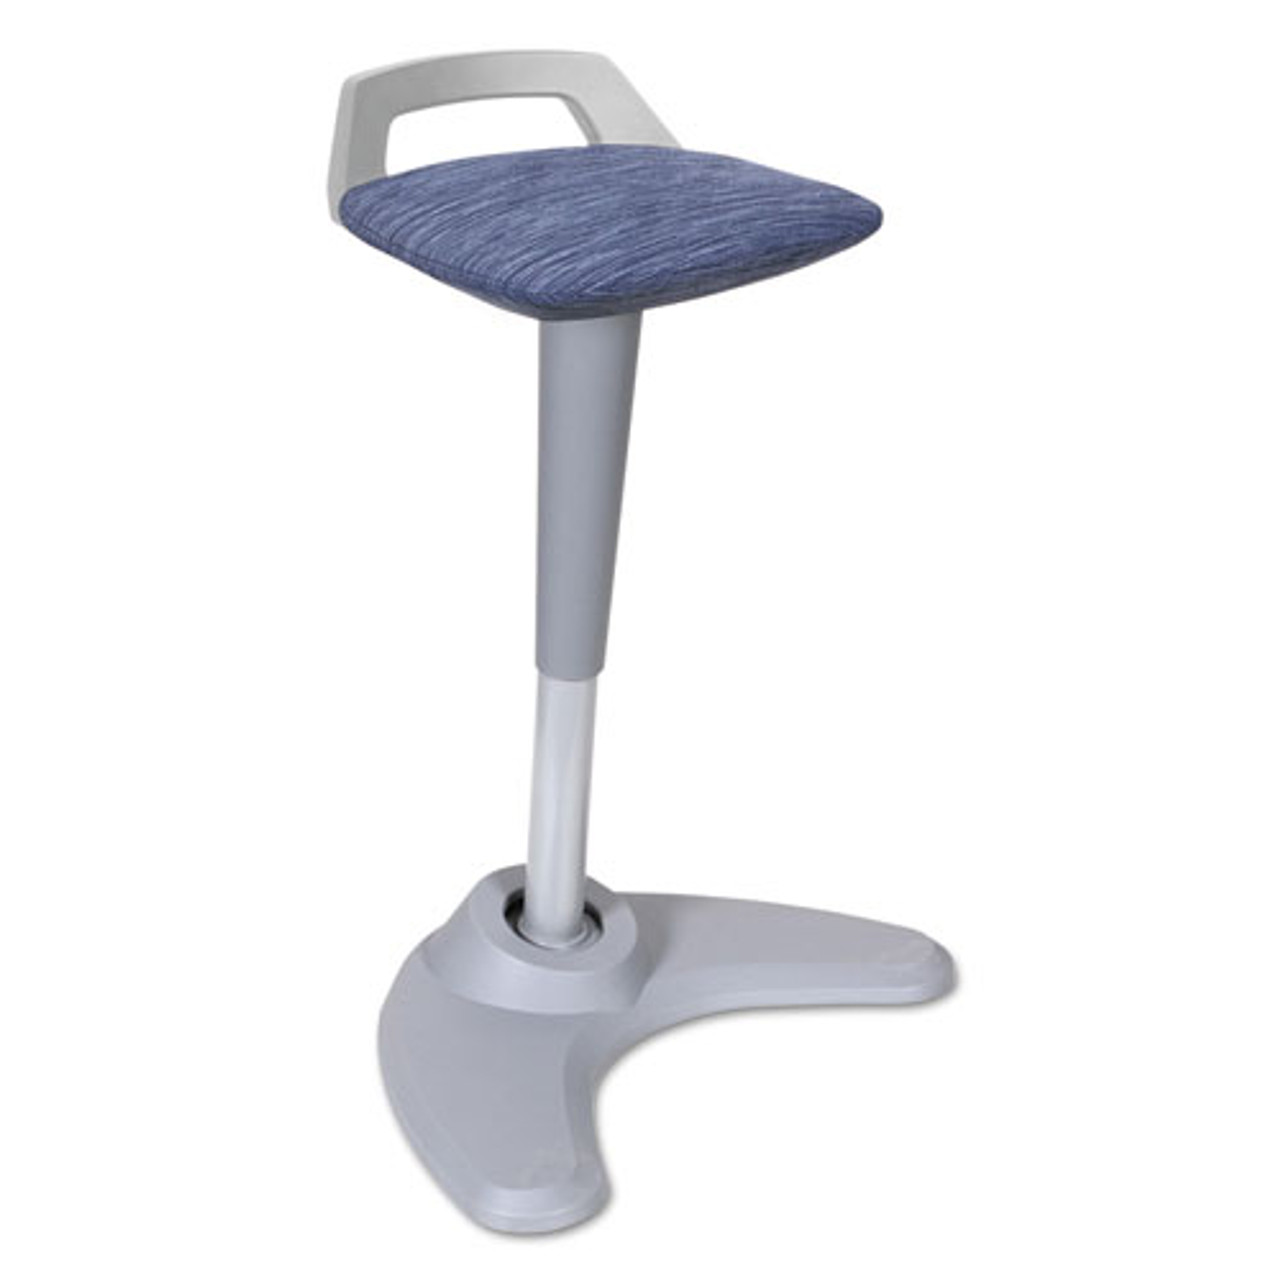 Adaptivergo Sit To Stand Perch Stool, Blue With Silver Base, #AL-1067